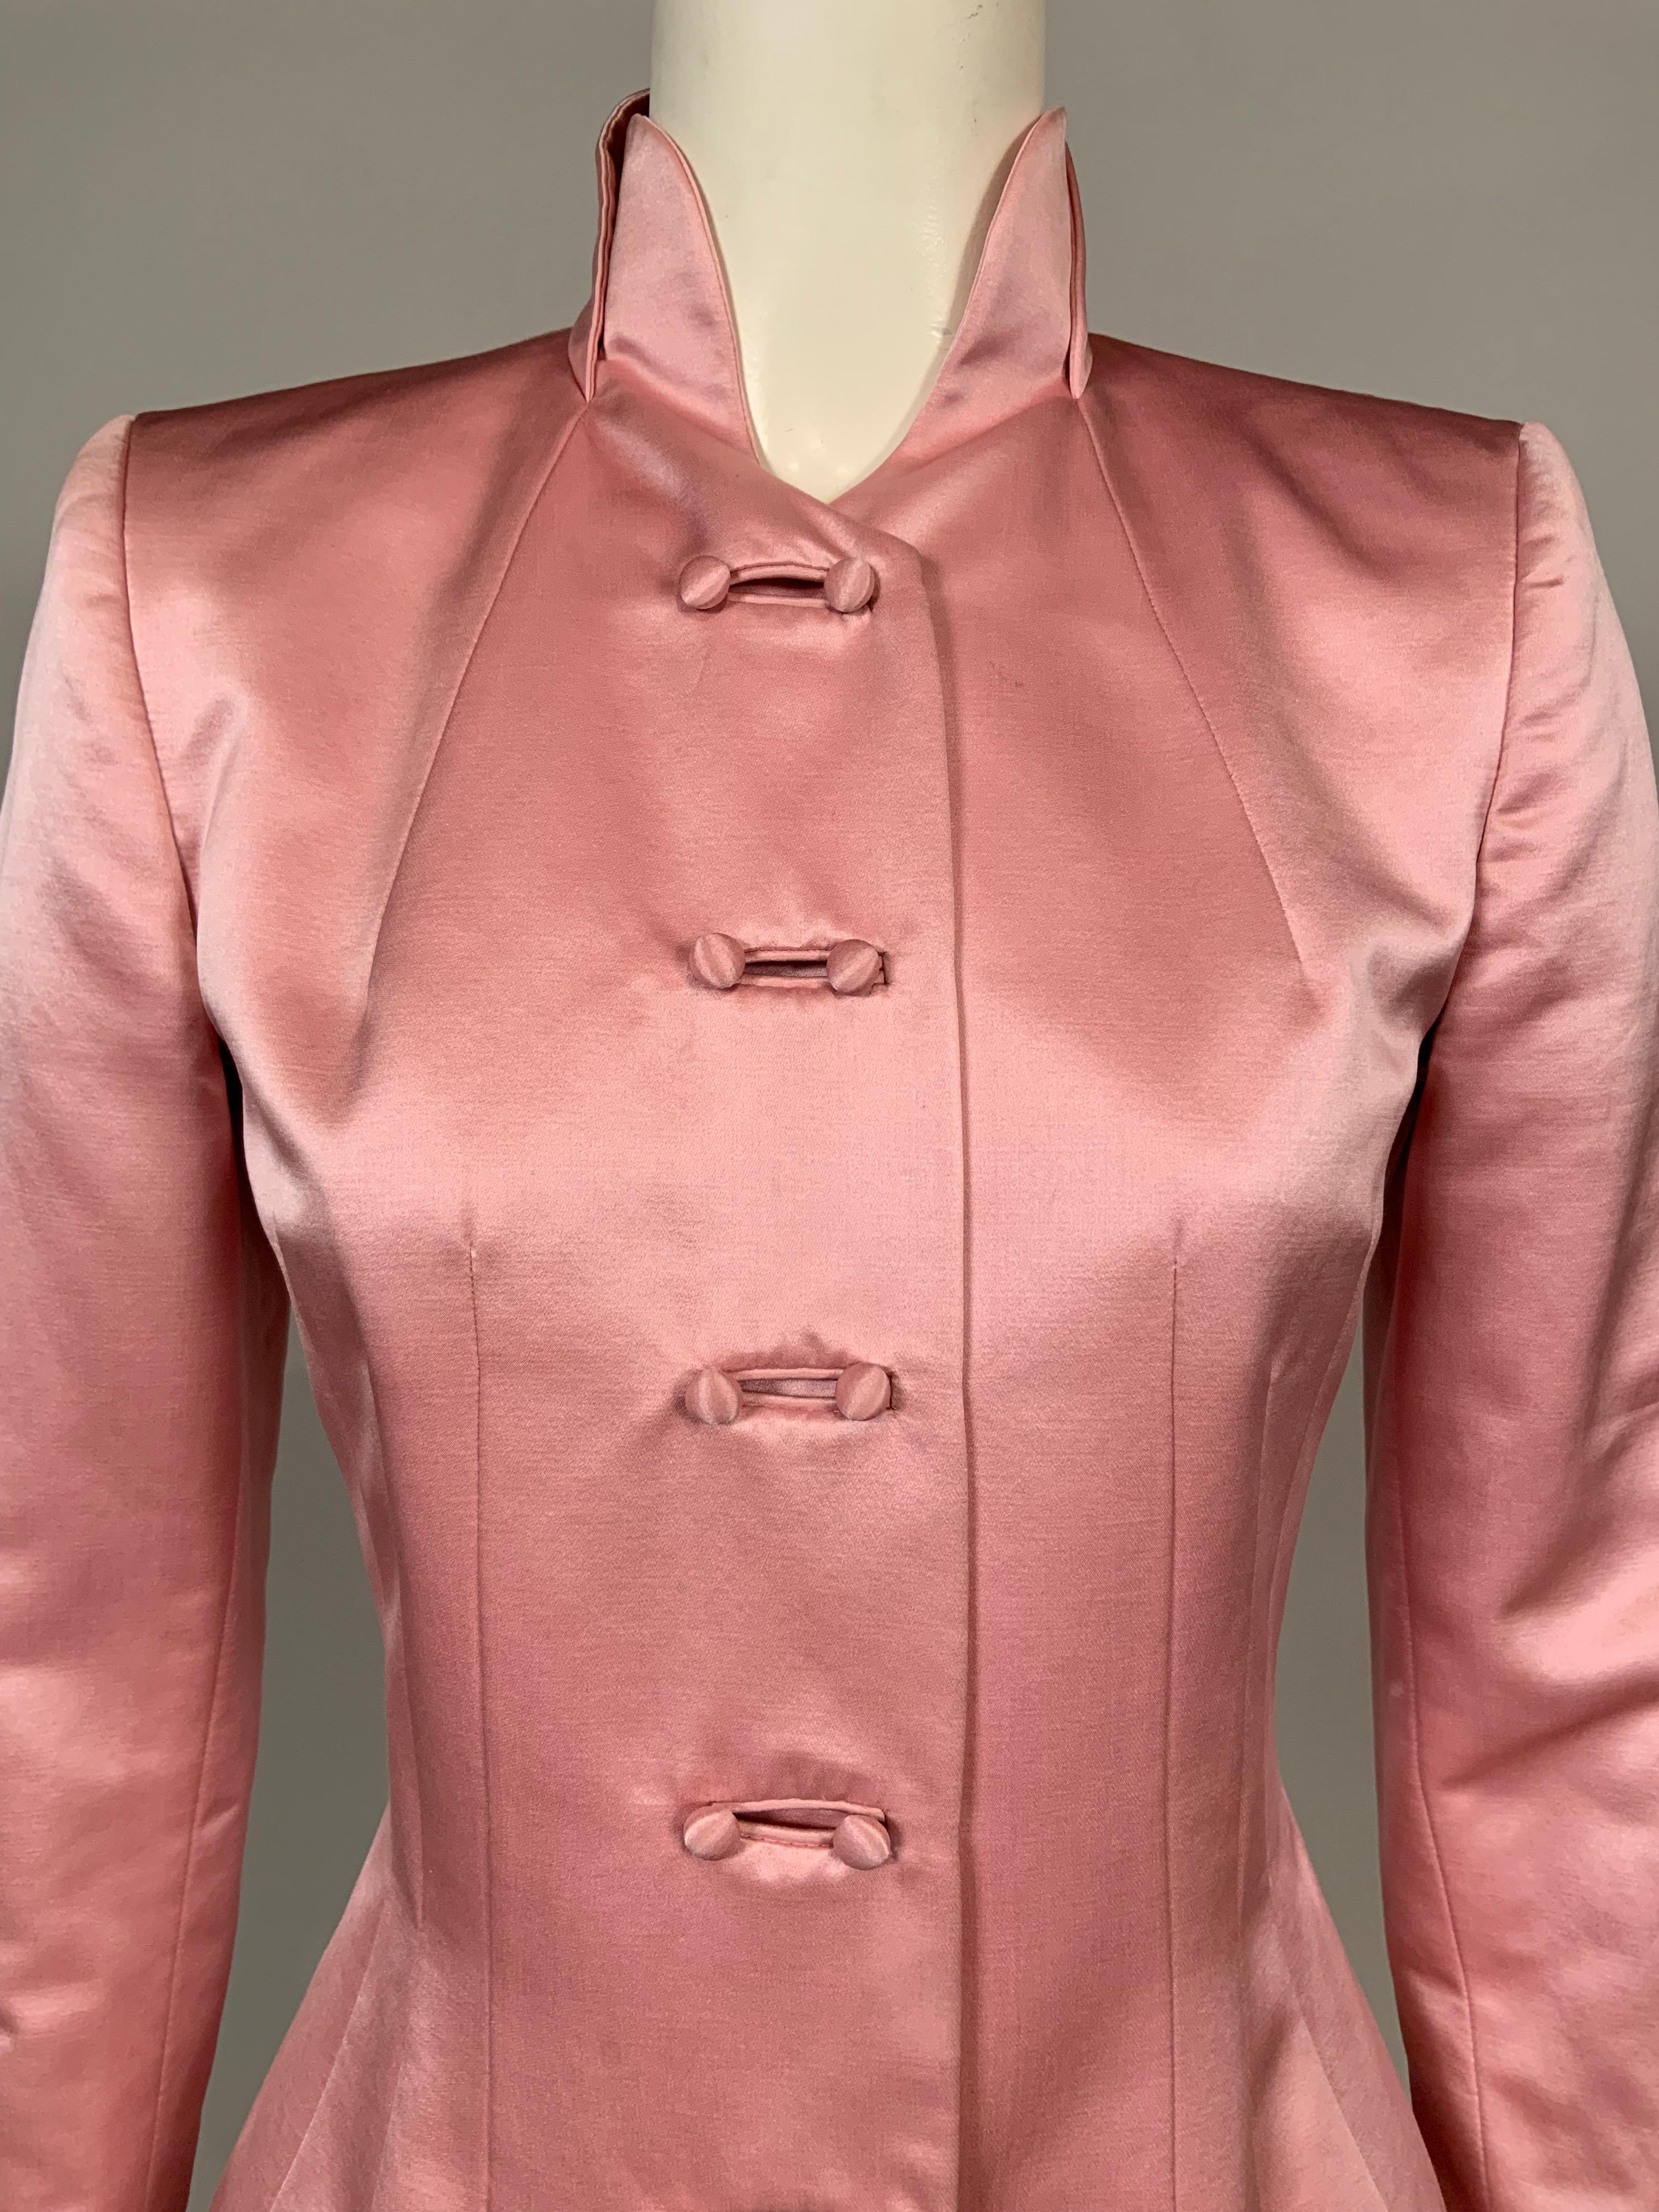 Pretty in Pink! This jacket is the most flattering shade of pink silk satin. It has a Mandarin style collar, a double set of buttons at the center front, deep cuffs with five decorative buttons and a beautifully fitted waistline with a series of